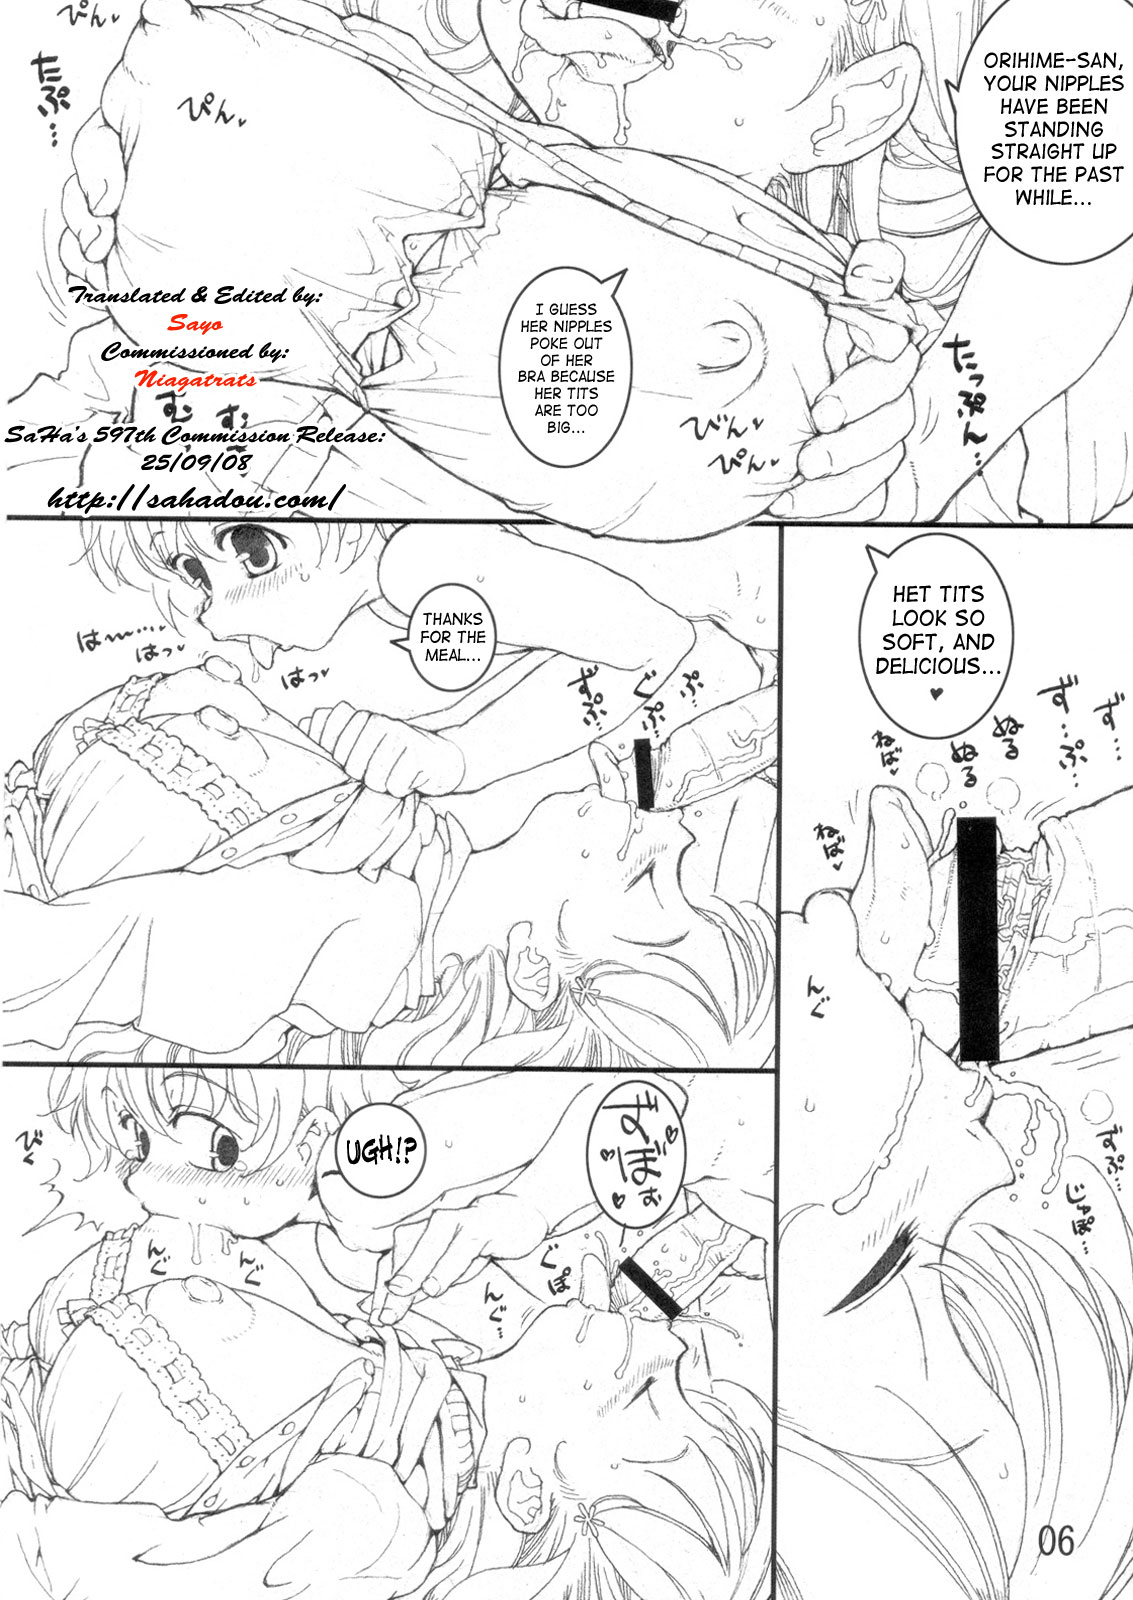 (COMIC1) [Tololinco (Tololi)] Orihime to Issho! -Stay With Orihime- (Bleach) [English] [SaHa] page 5 full